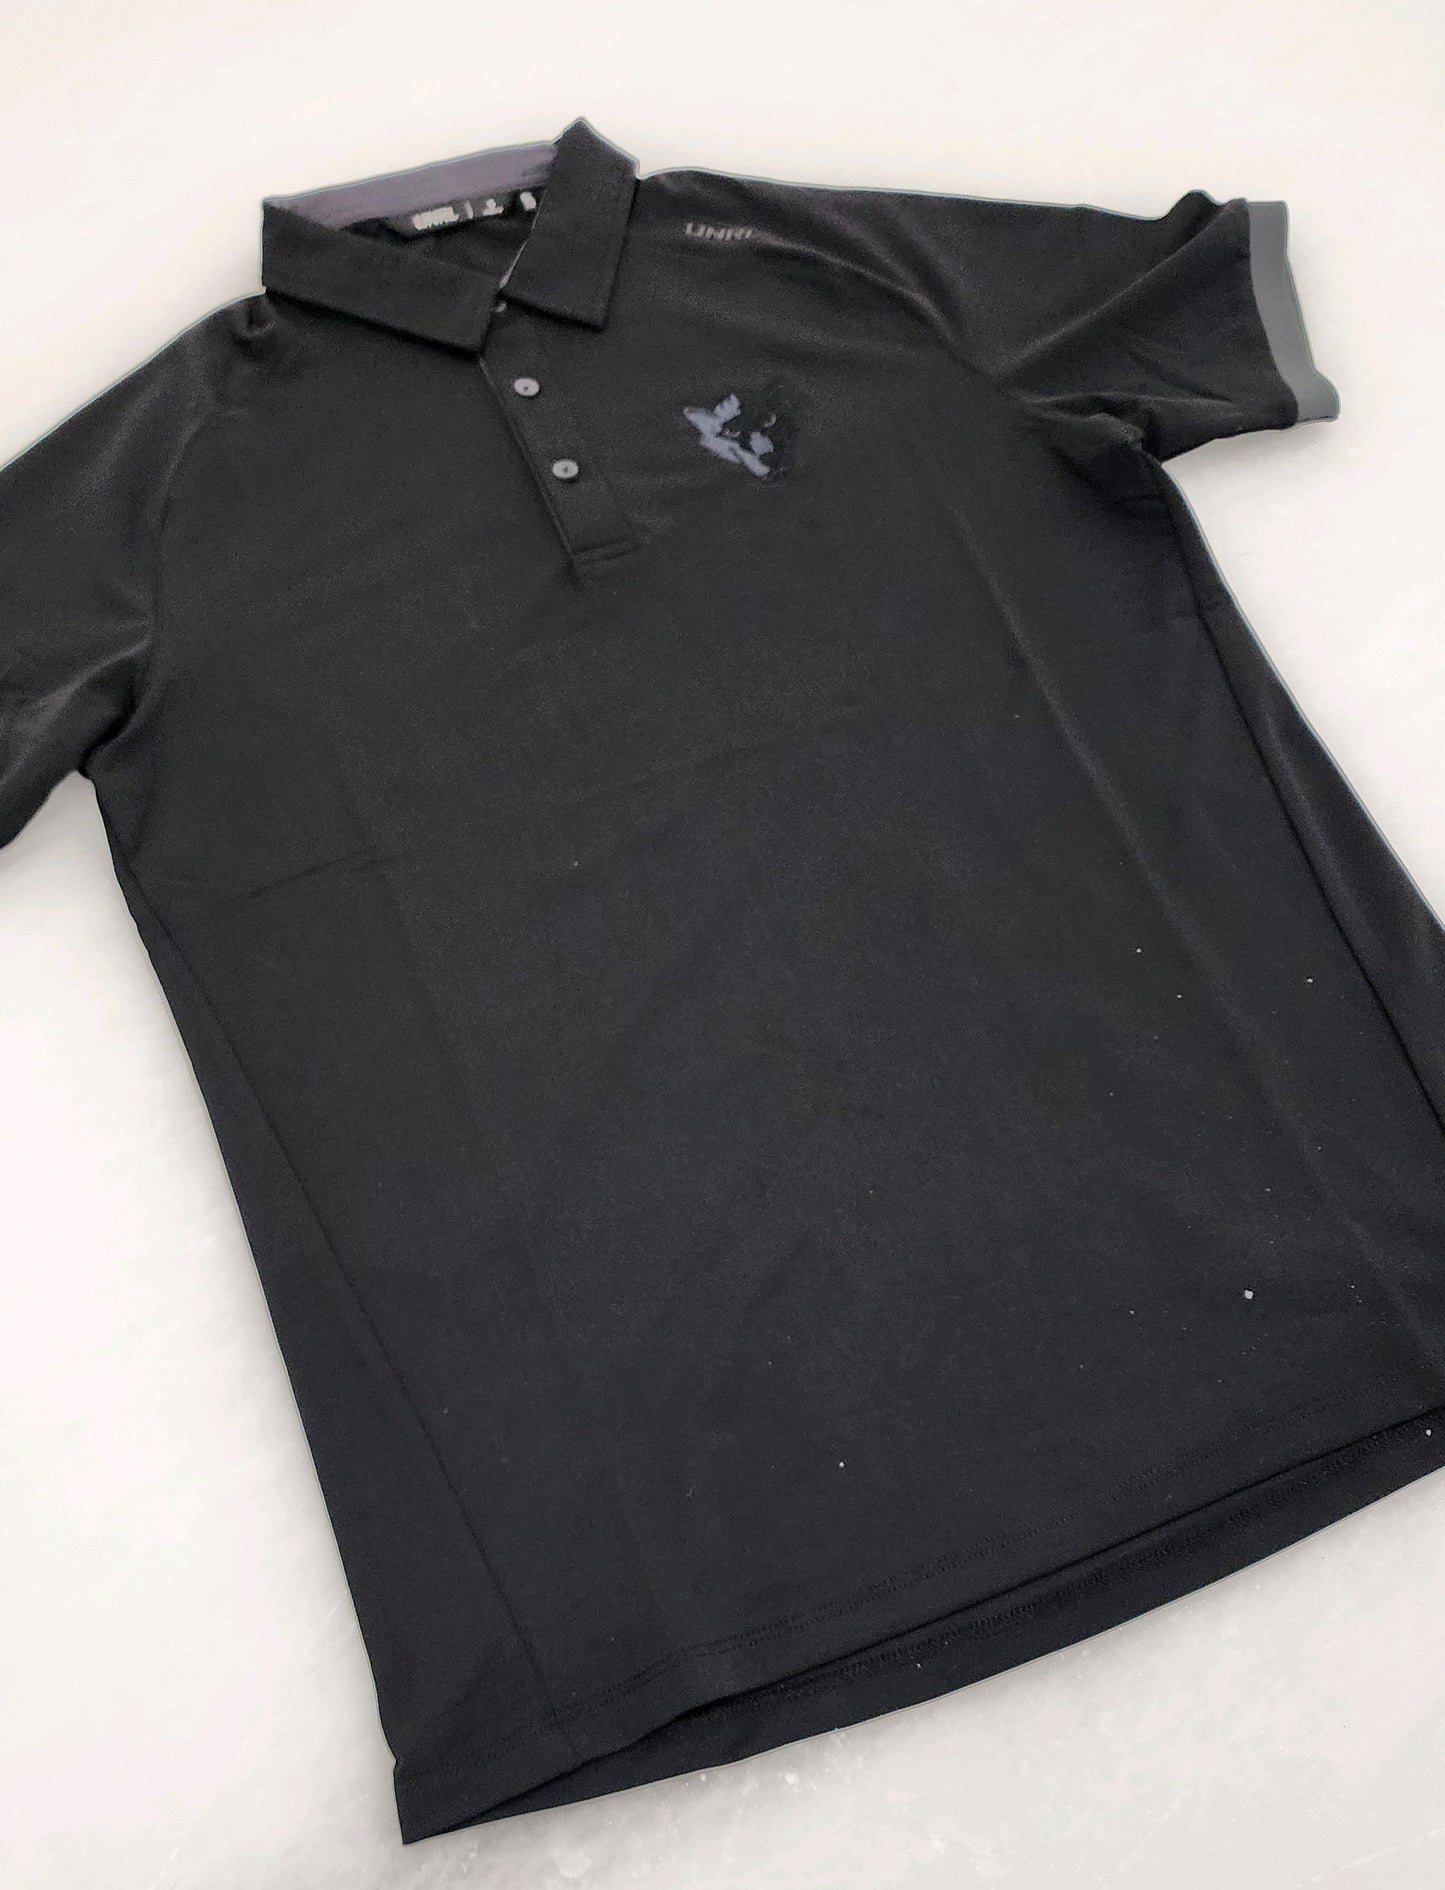 NMIW UNRL Blackout Tradition Polo